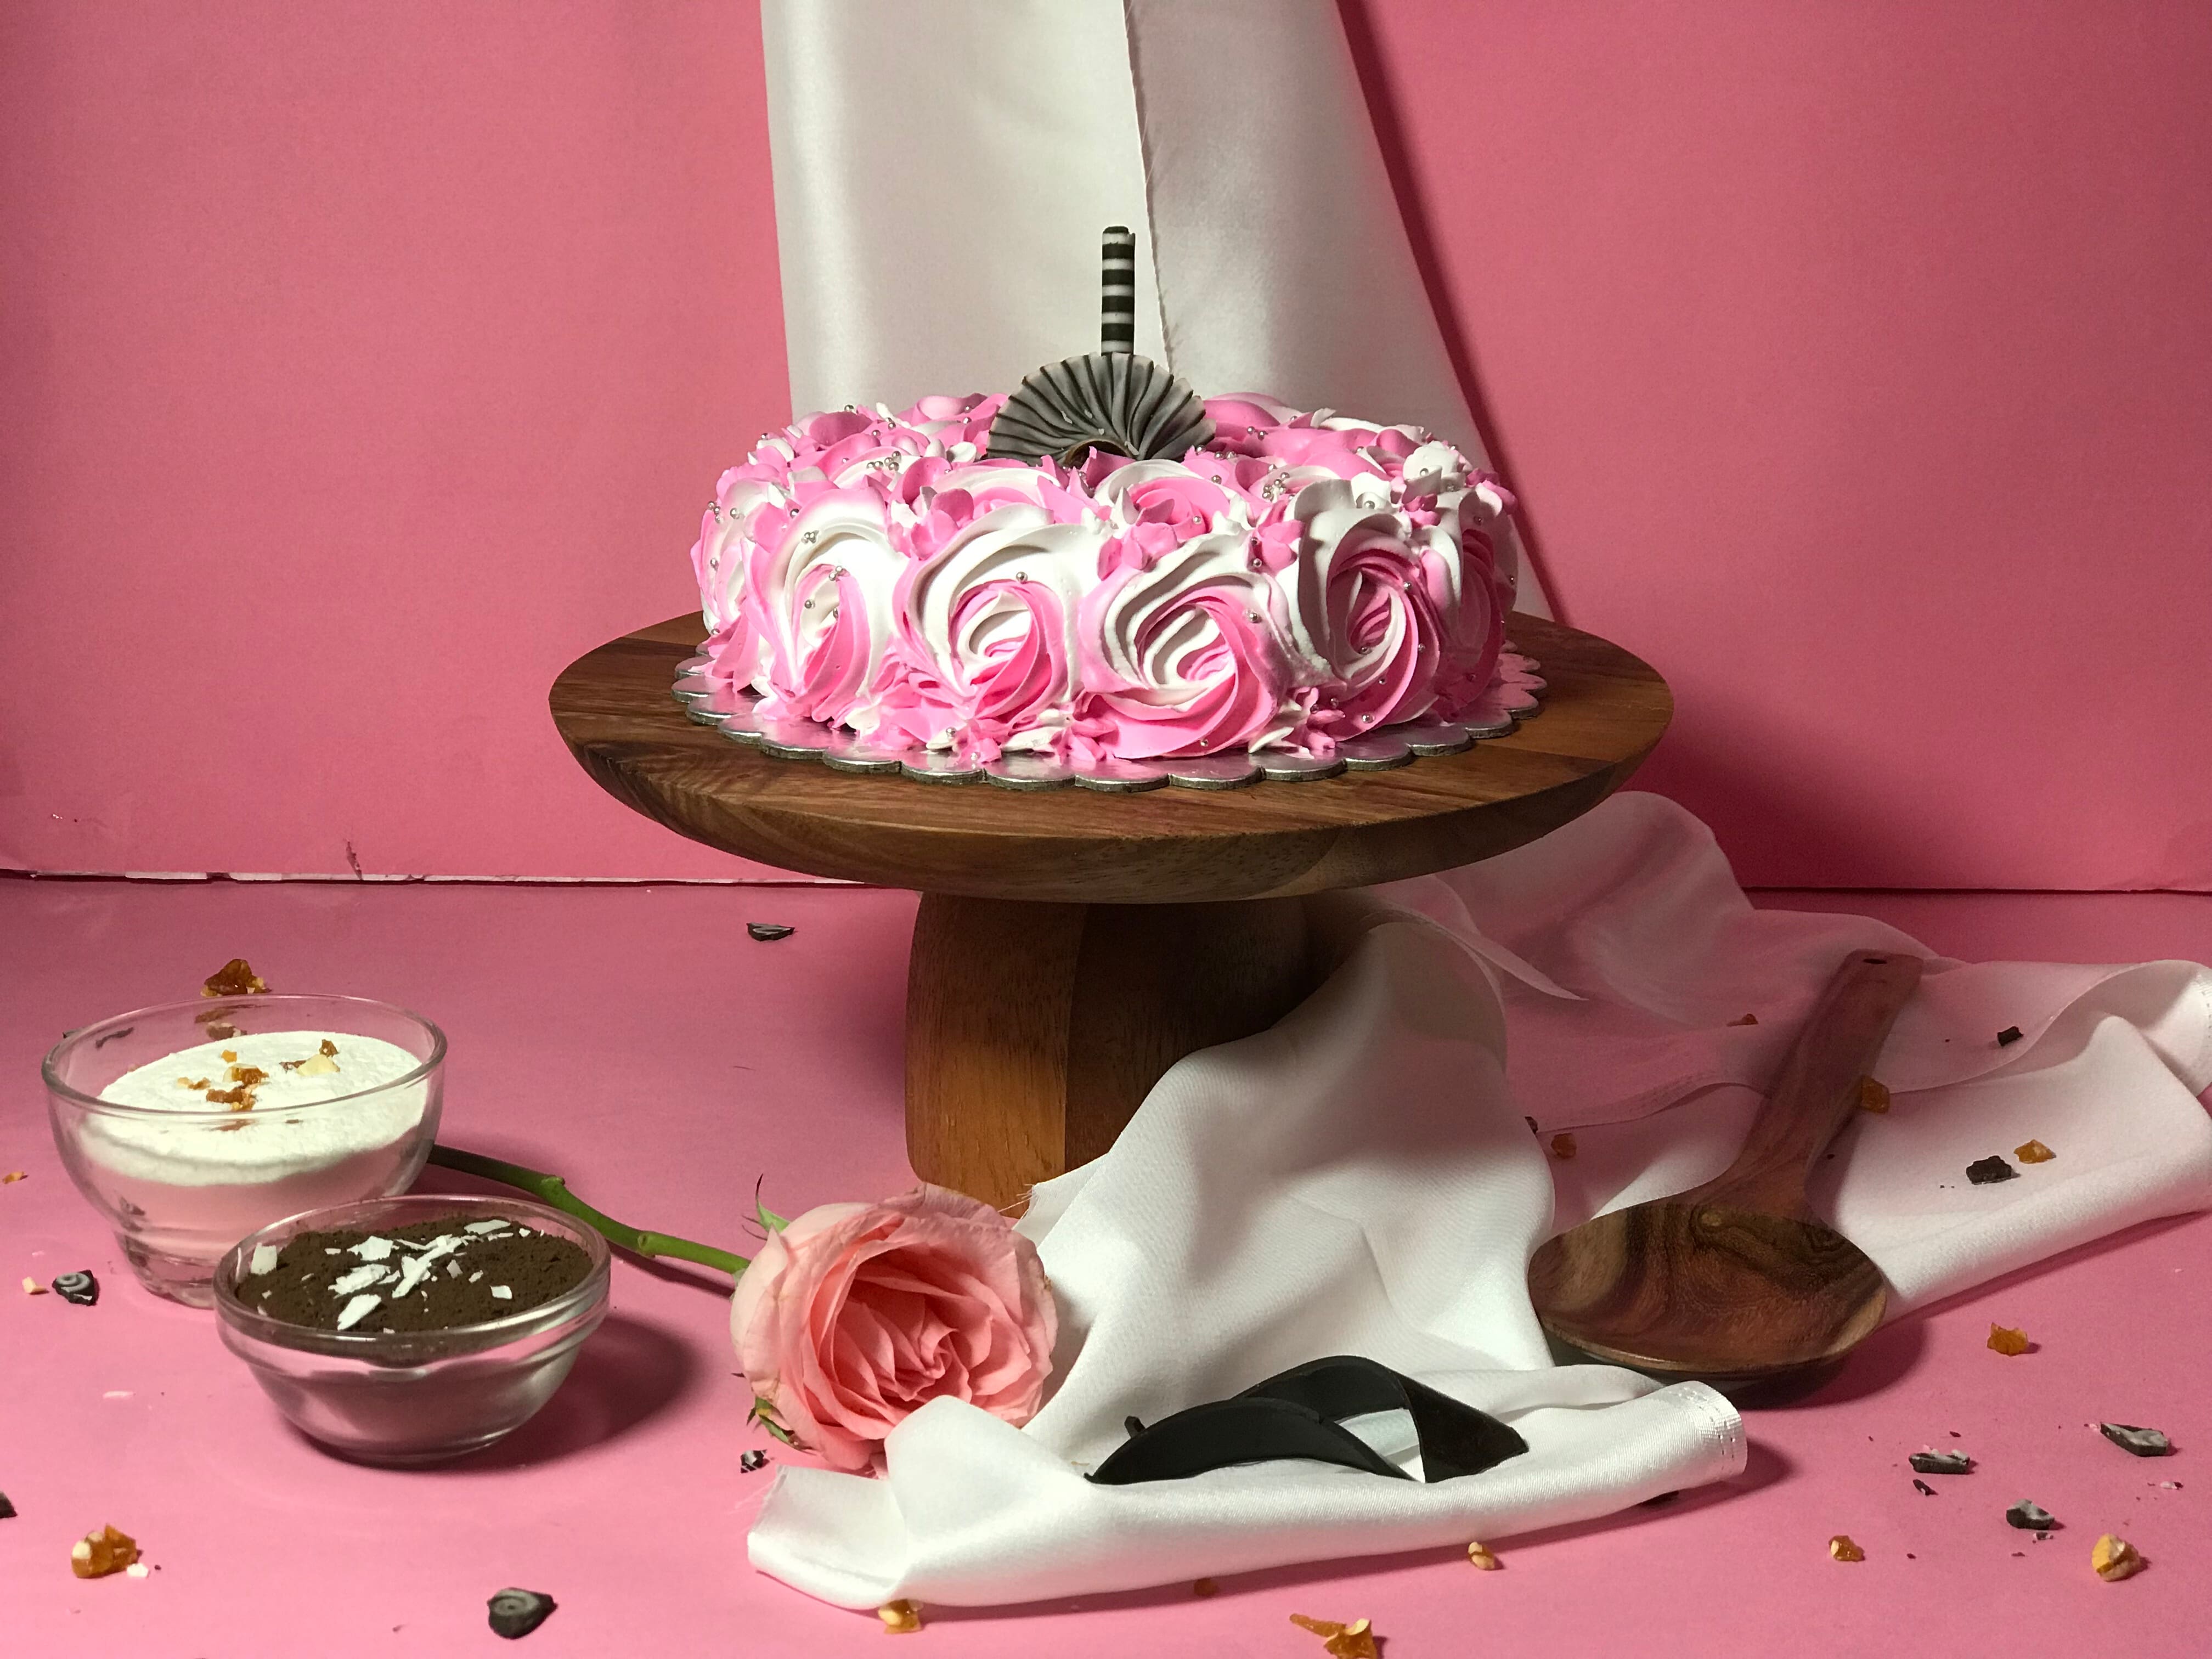 Crazy cake designs: readers' pictures | Food | The Guardian